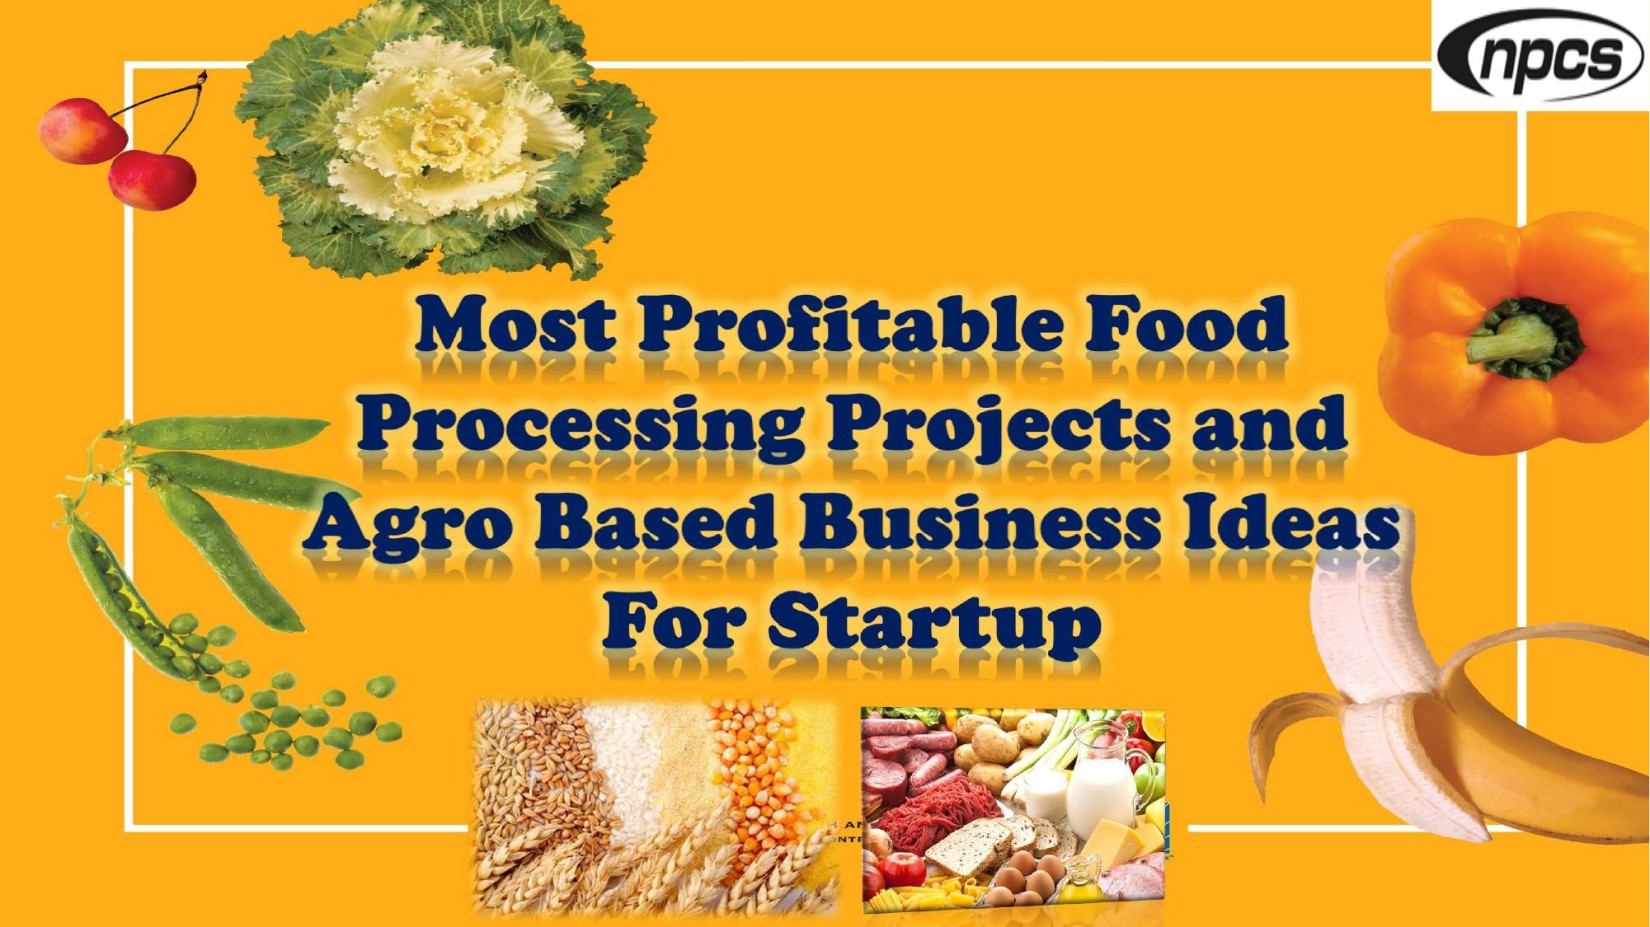 Most Profitable Food Processing Projects and Agro Based Business Ideas for Startup